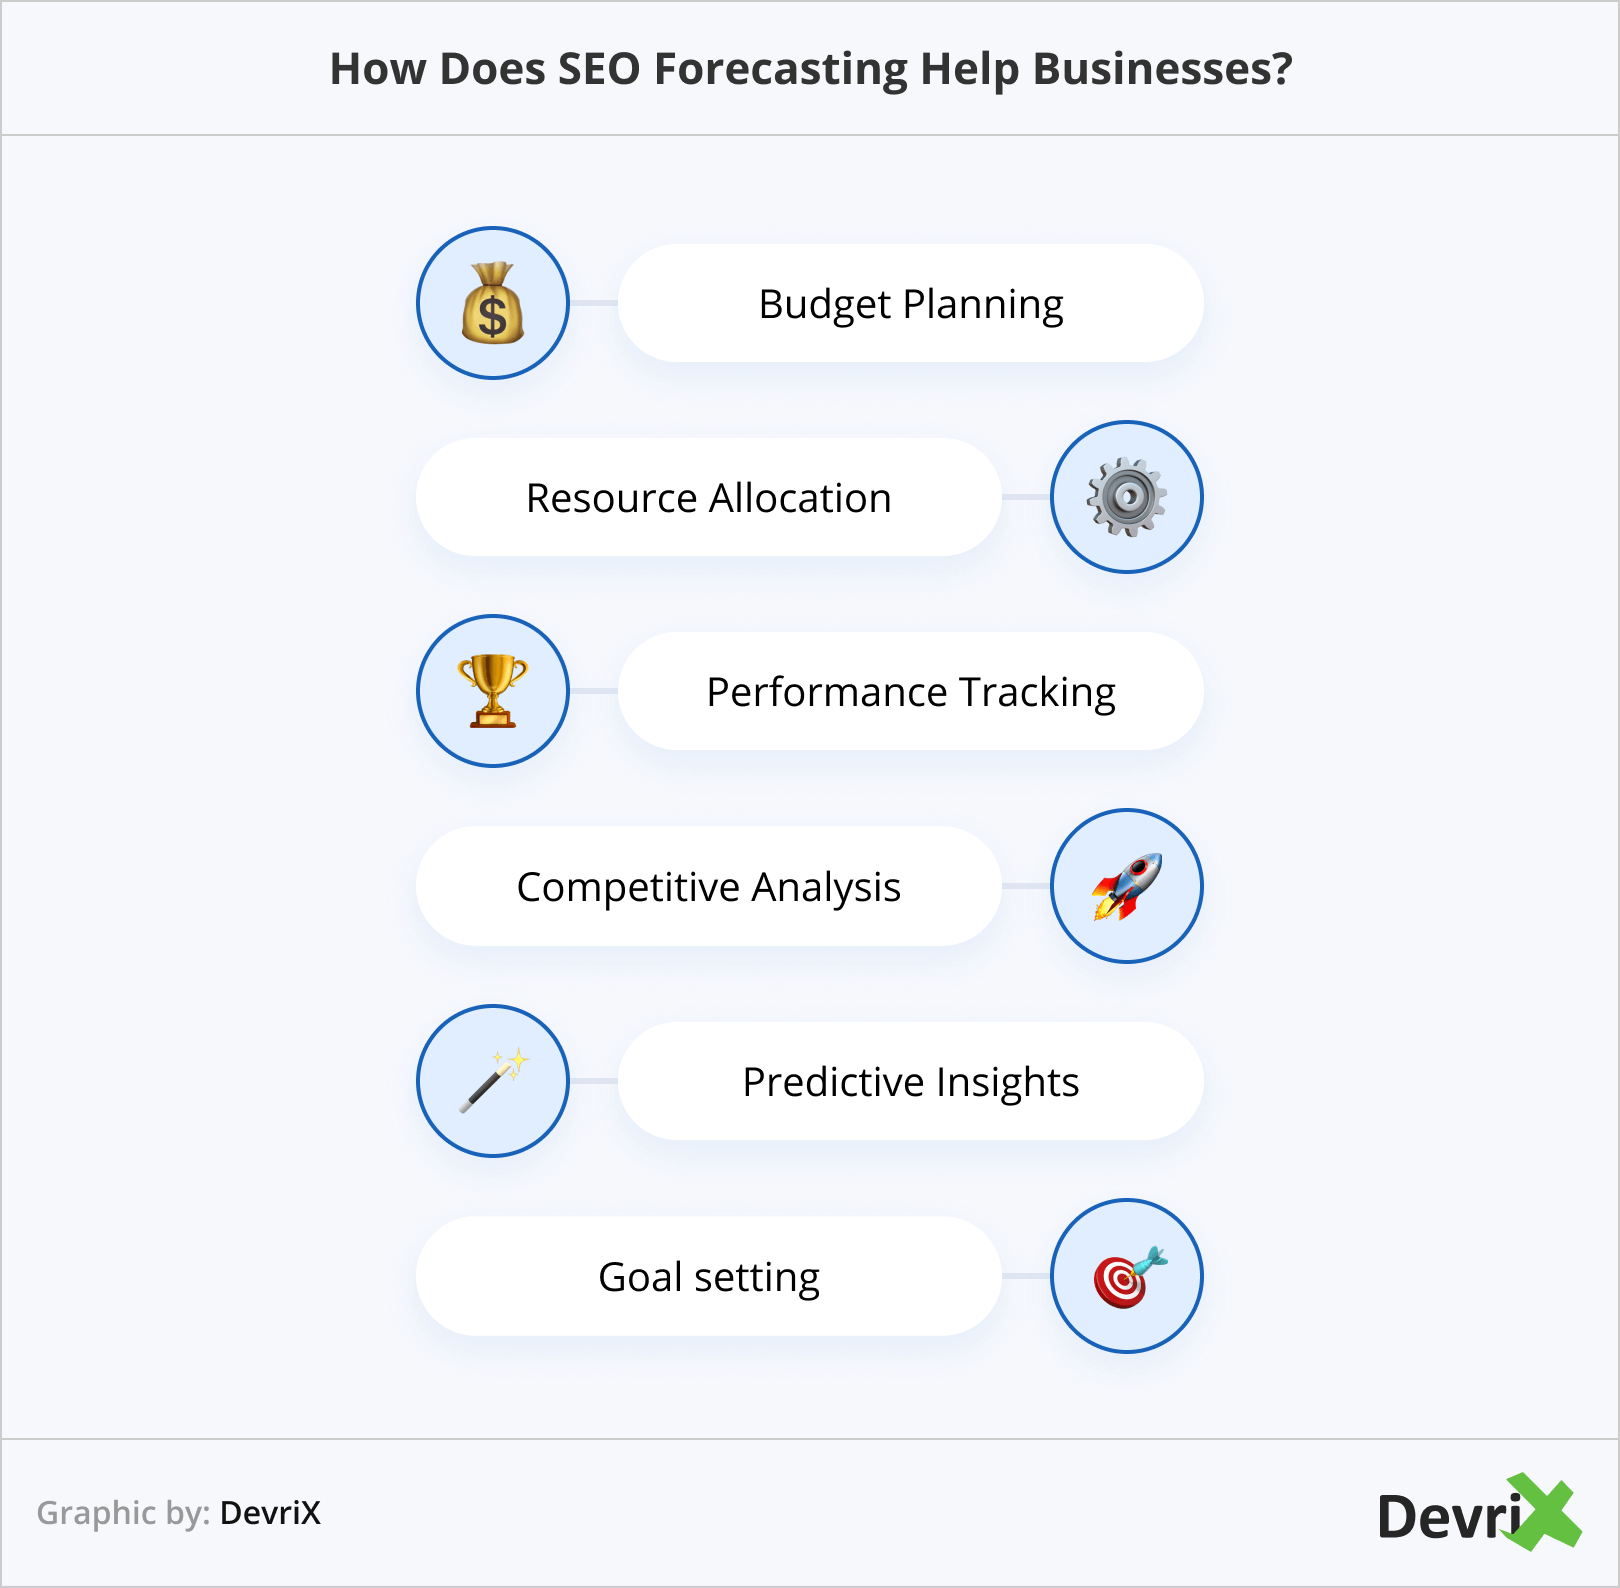 How Does SEO Forecasting Help Businesses